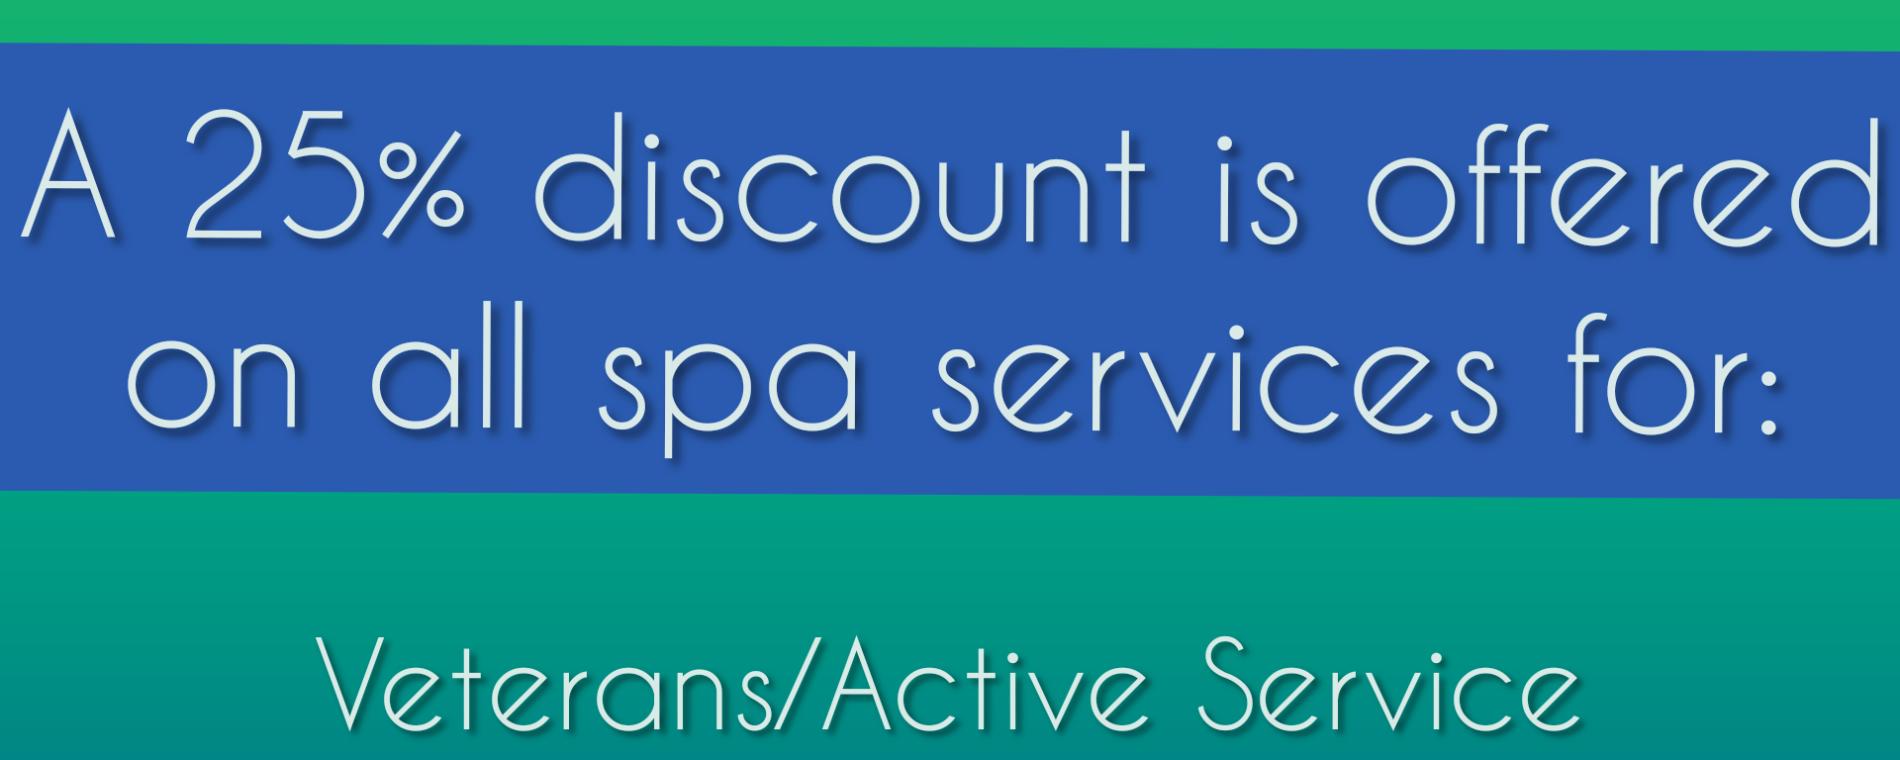 25% DISCOUNT ON ALL SERVICES